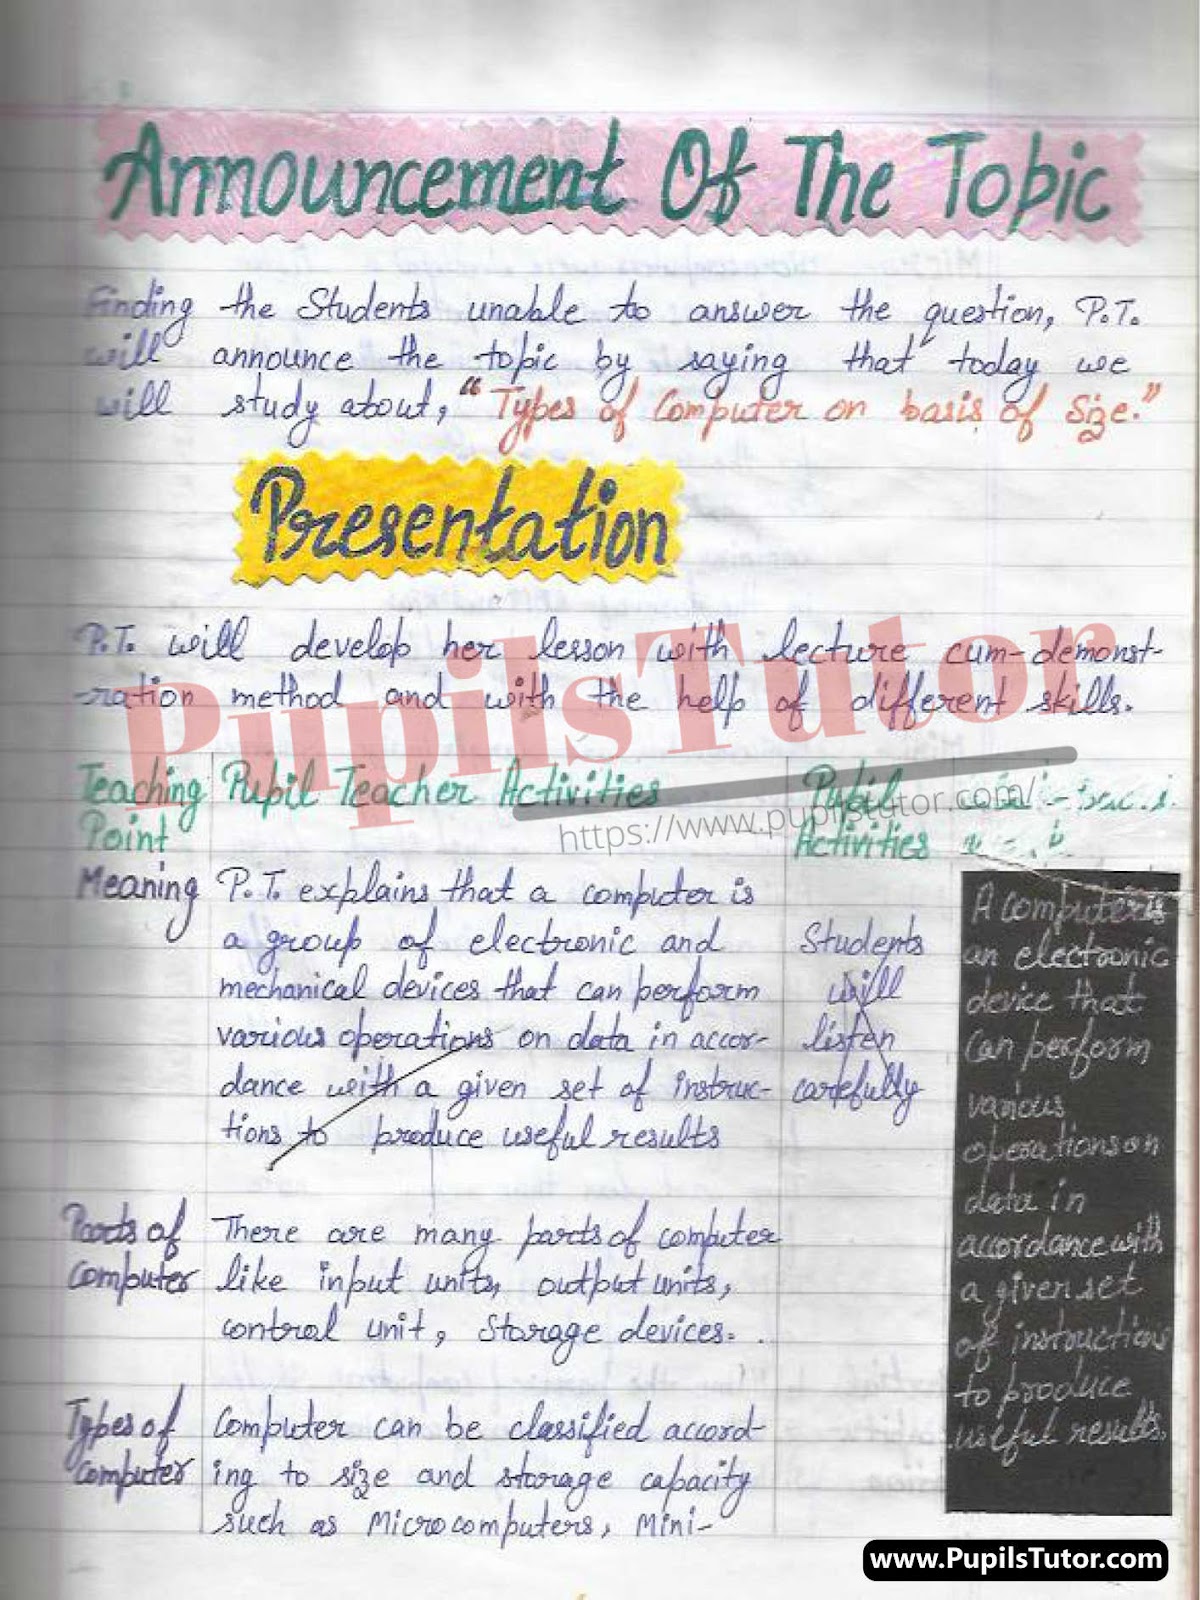 Class/Grade 8 Computer Science Mega Teaching  Lesson Plan On Types Of Computers For CBSE NCERT KVS School And University College Teachers – (Page And Image Number 3) – www.pupilstutor.com